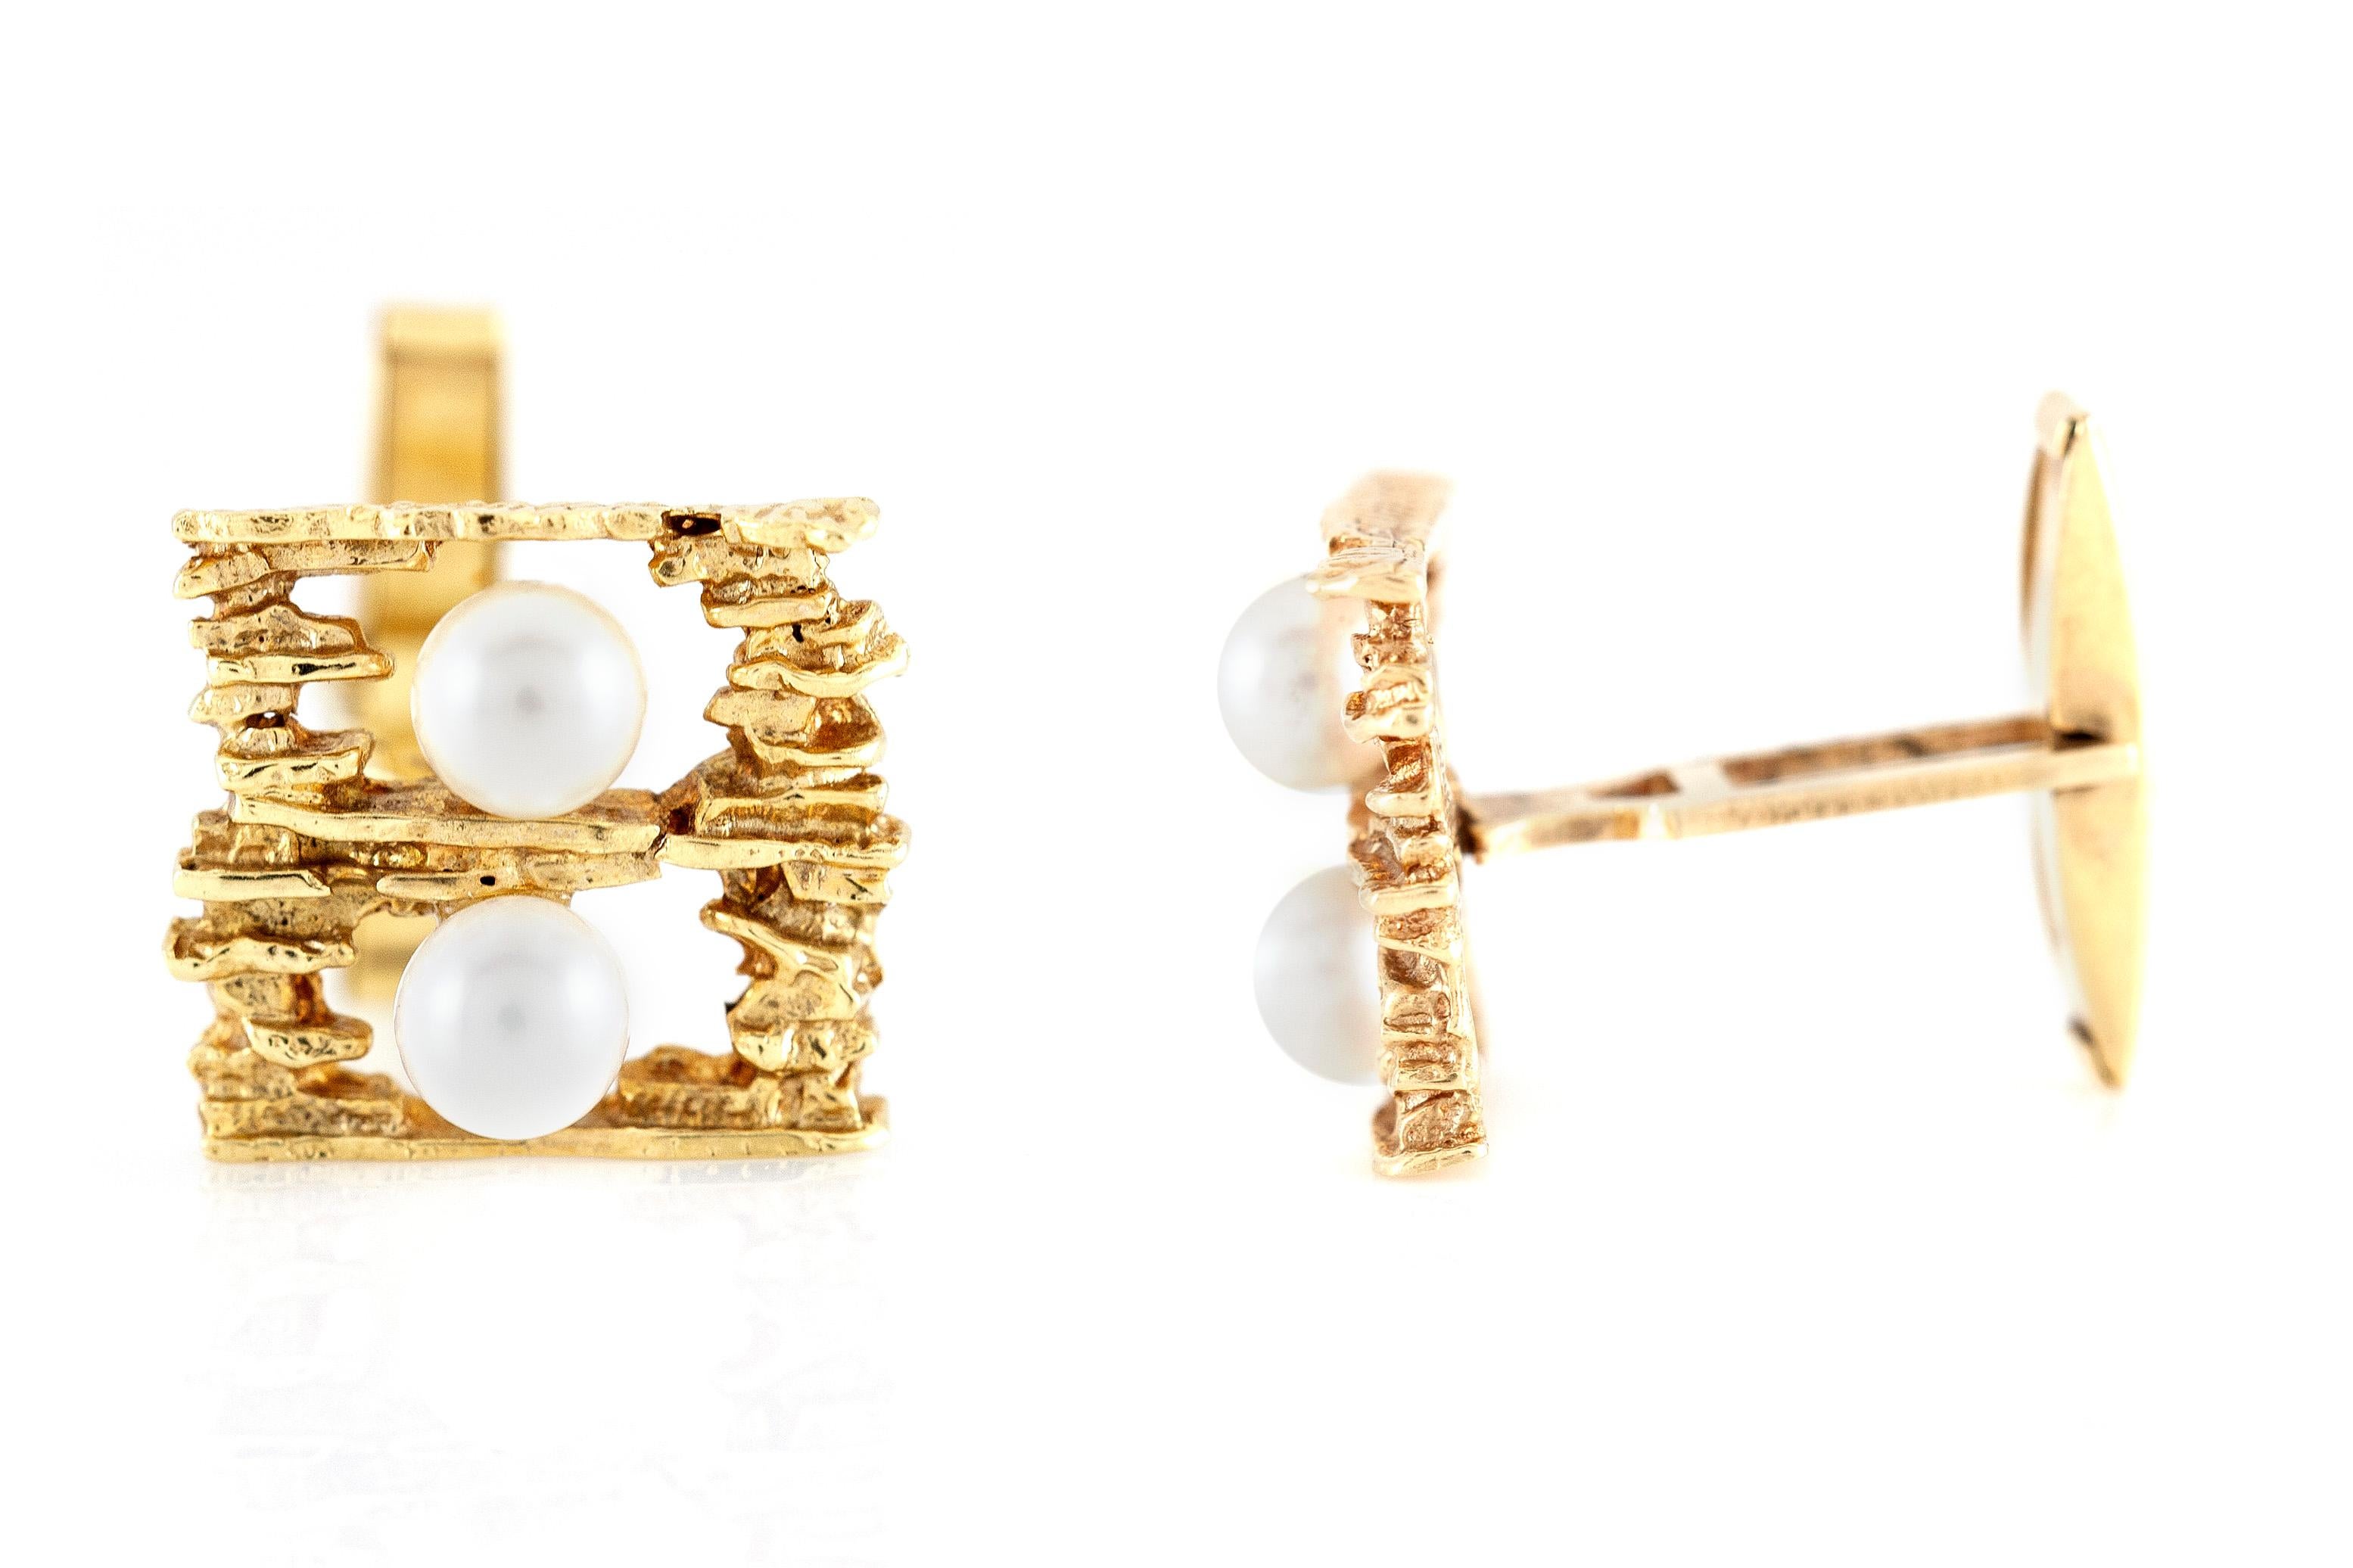 Cufflinks finely crafted in 14k yellow gold with two pearls on each piece, size of each cufflink is 0.80 inch. Circa 1920.